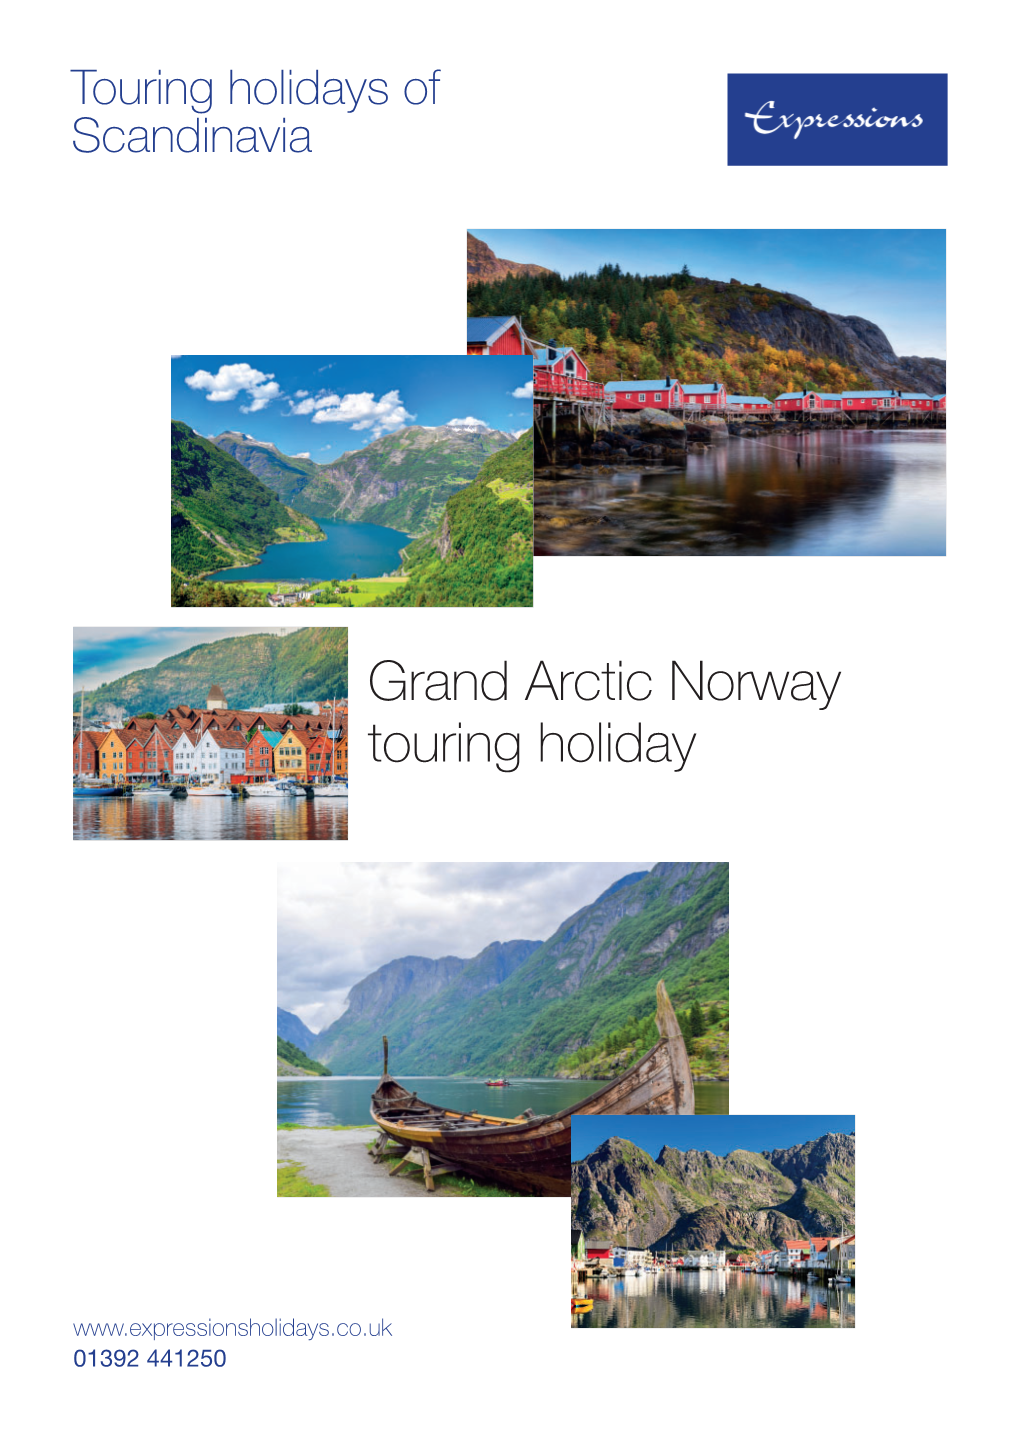 SCFD06 Grand Arctic Norway Tour.Indd